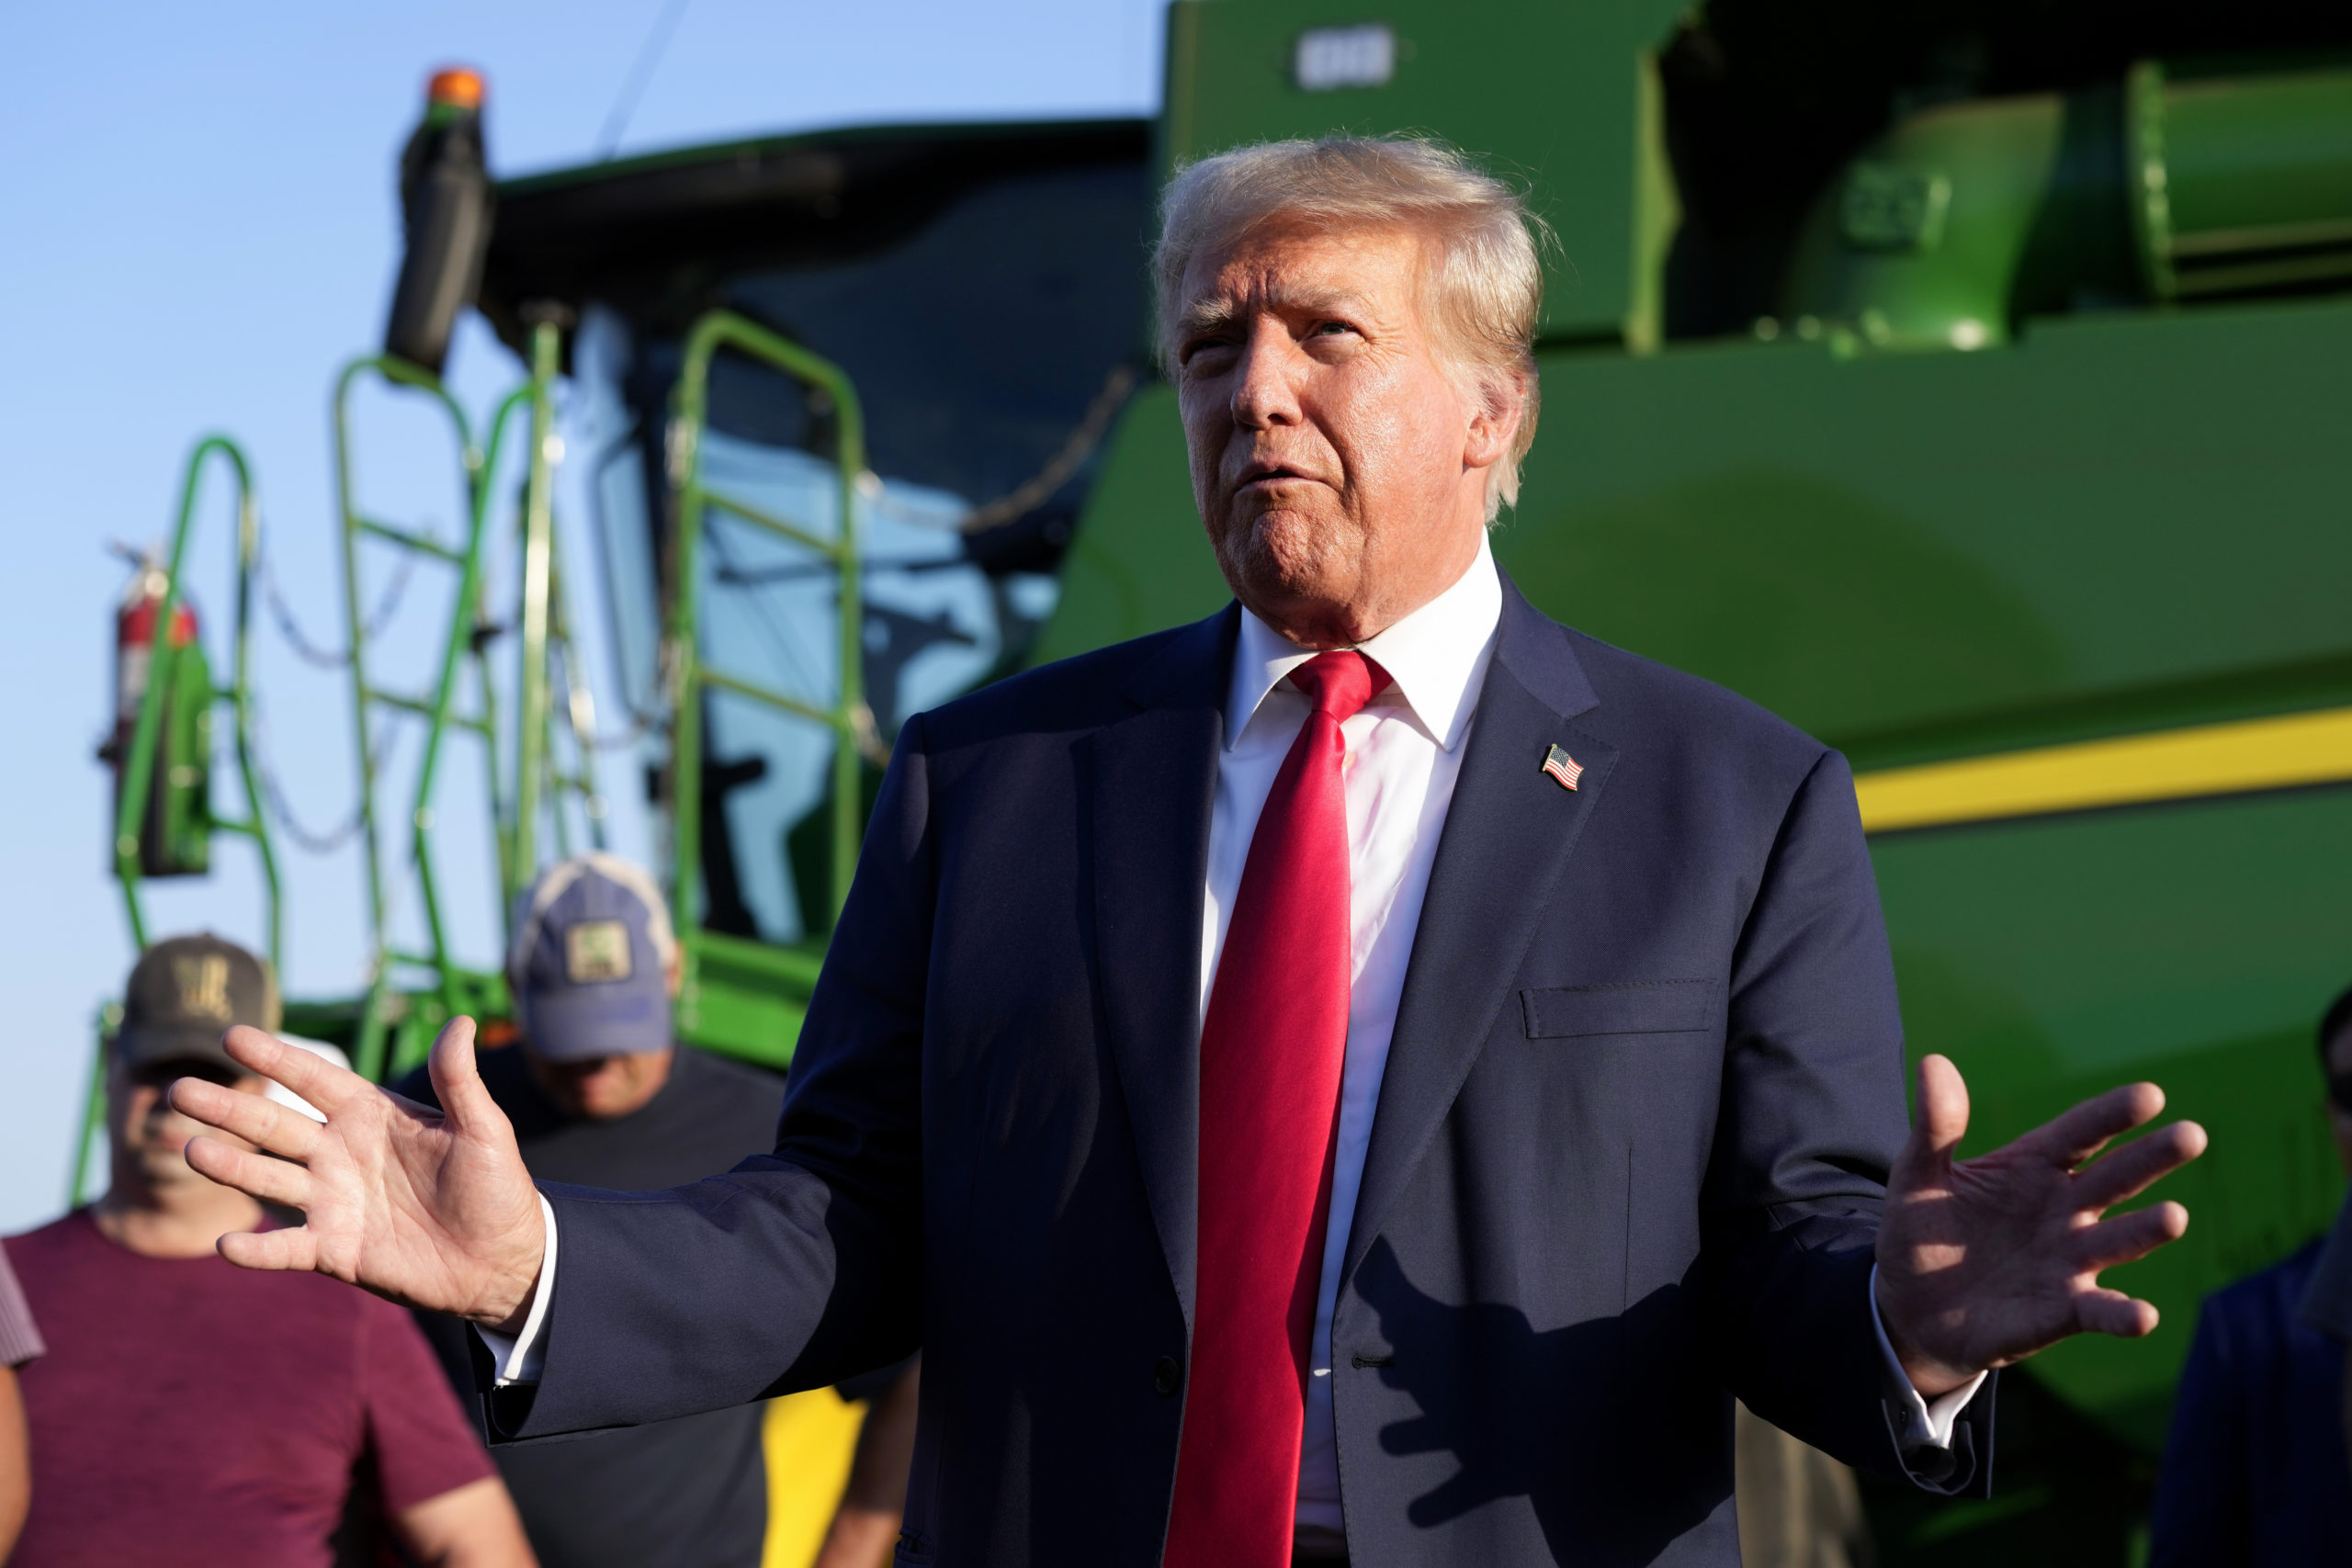 Former President Donald Trump speaks to reporters on Sunday during a visit to the Vande Voort family farm in Leighton, Iowa.